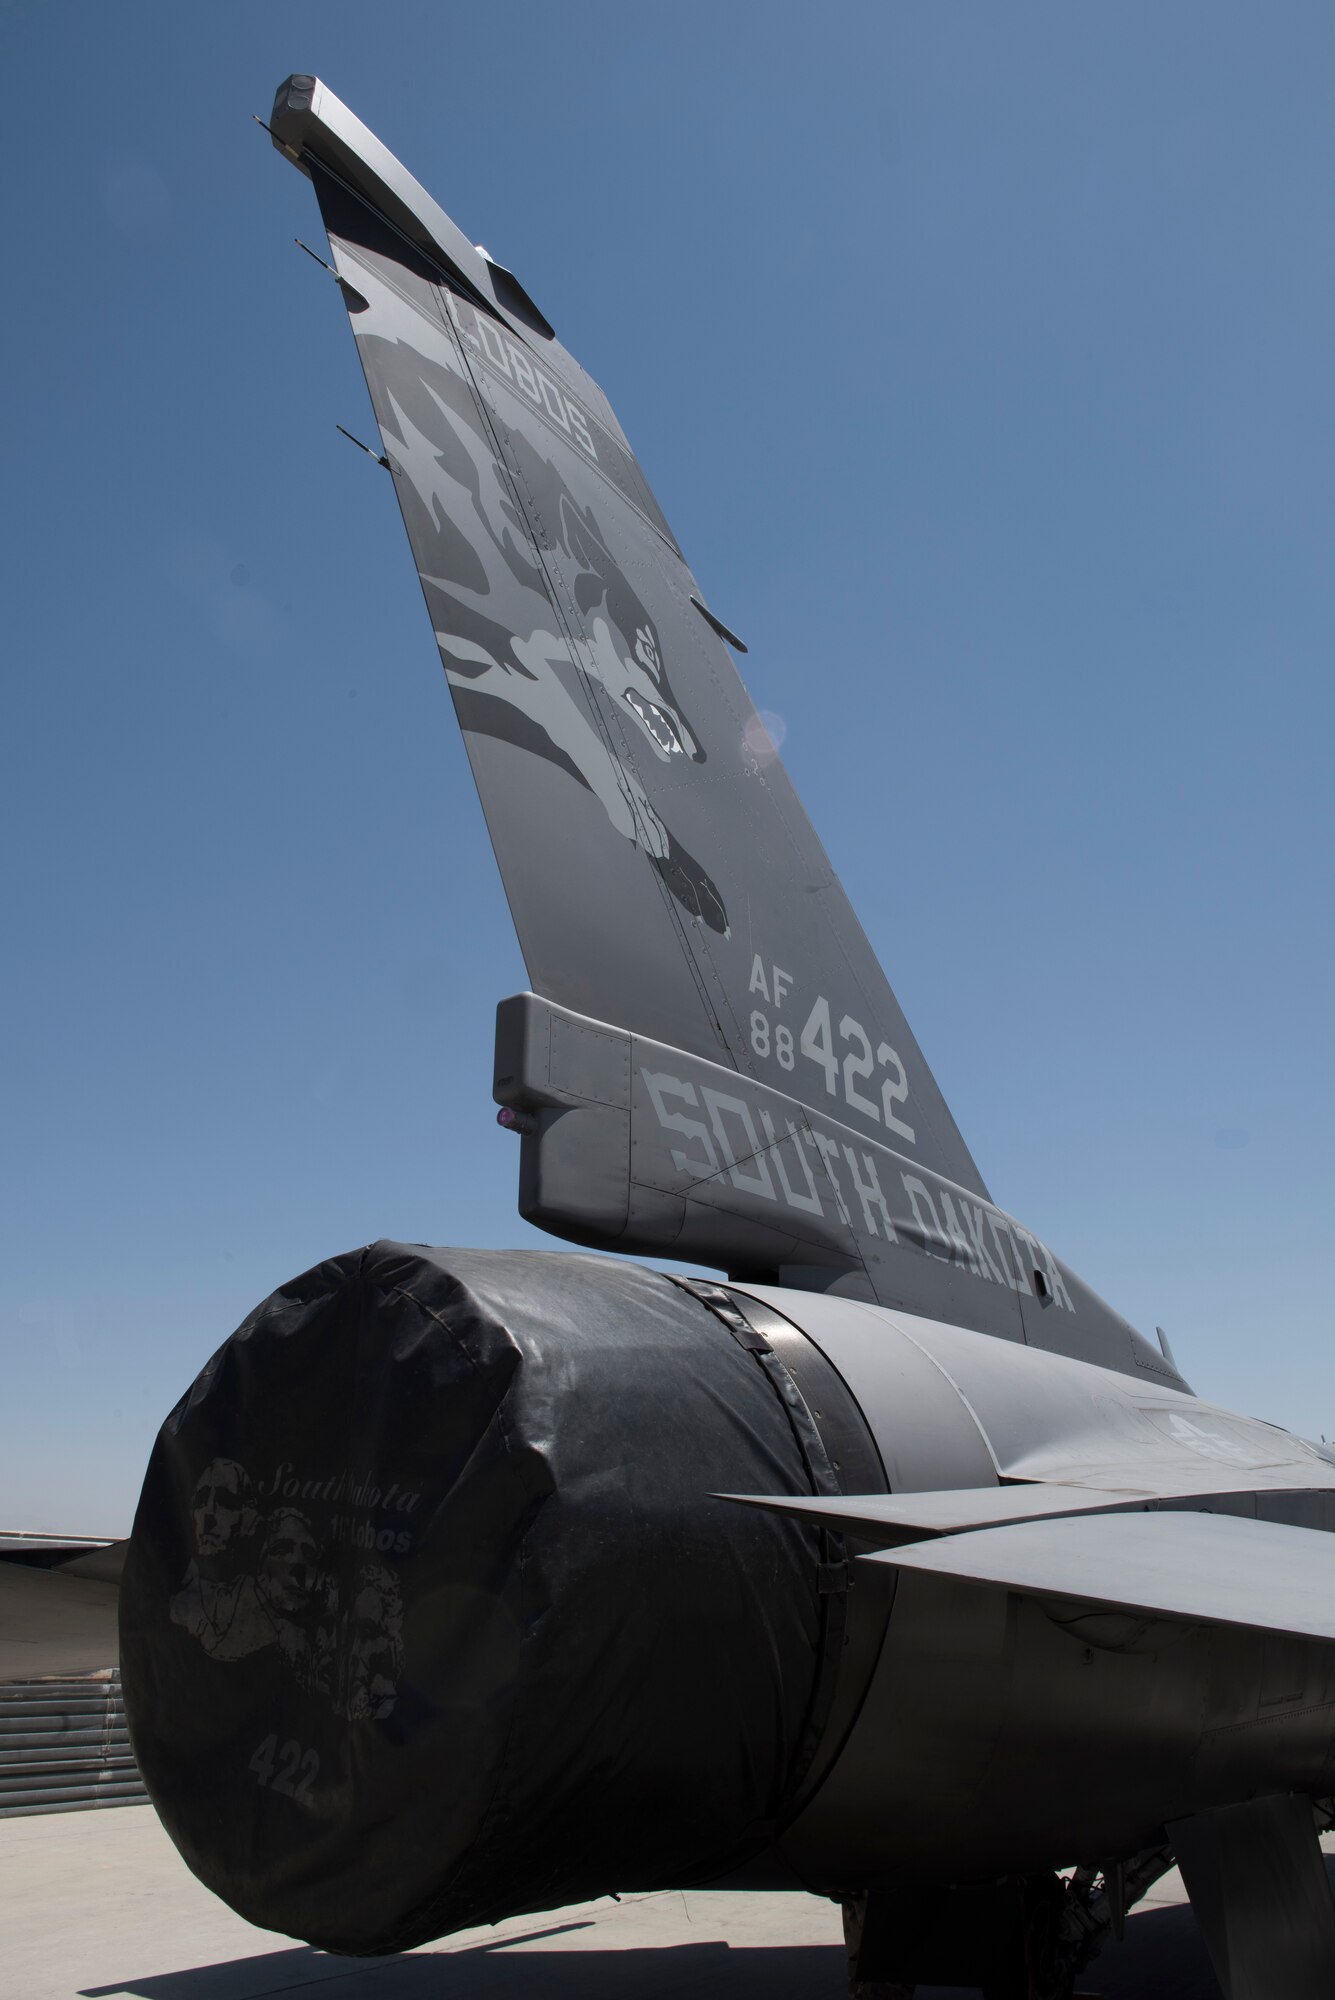 An F-16 Fighting Falcon from the 175th Expeditionary Fighter Squadron, South Dakota Air National Guard, sits on the ramp at Bagram Airfield, Afghanistan, August 5, 2018. The 175th EFS are deployed from the 114th Fighter Wing, Joe Foss Field, Sioux Falls, in support of combat operations in Afghanistan. (U.S. Air Force photo by Tech. Sgt. Eugene Crist)